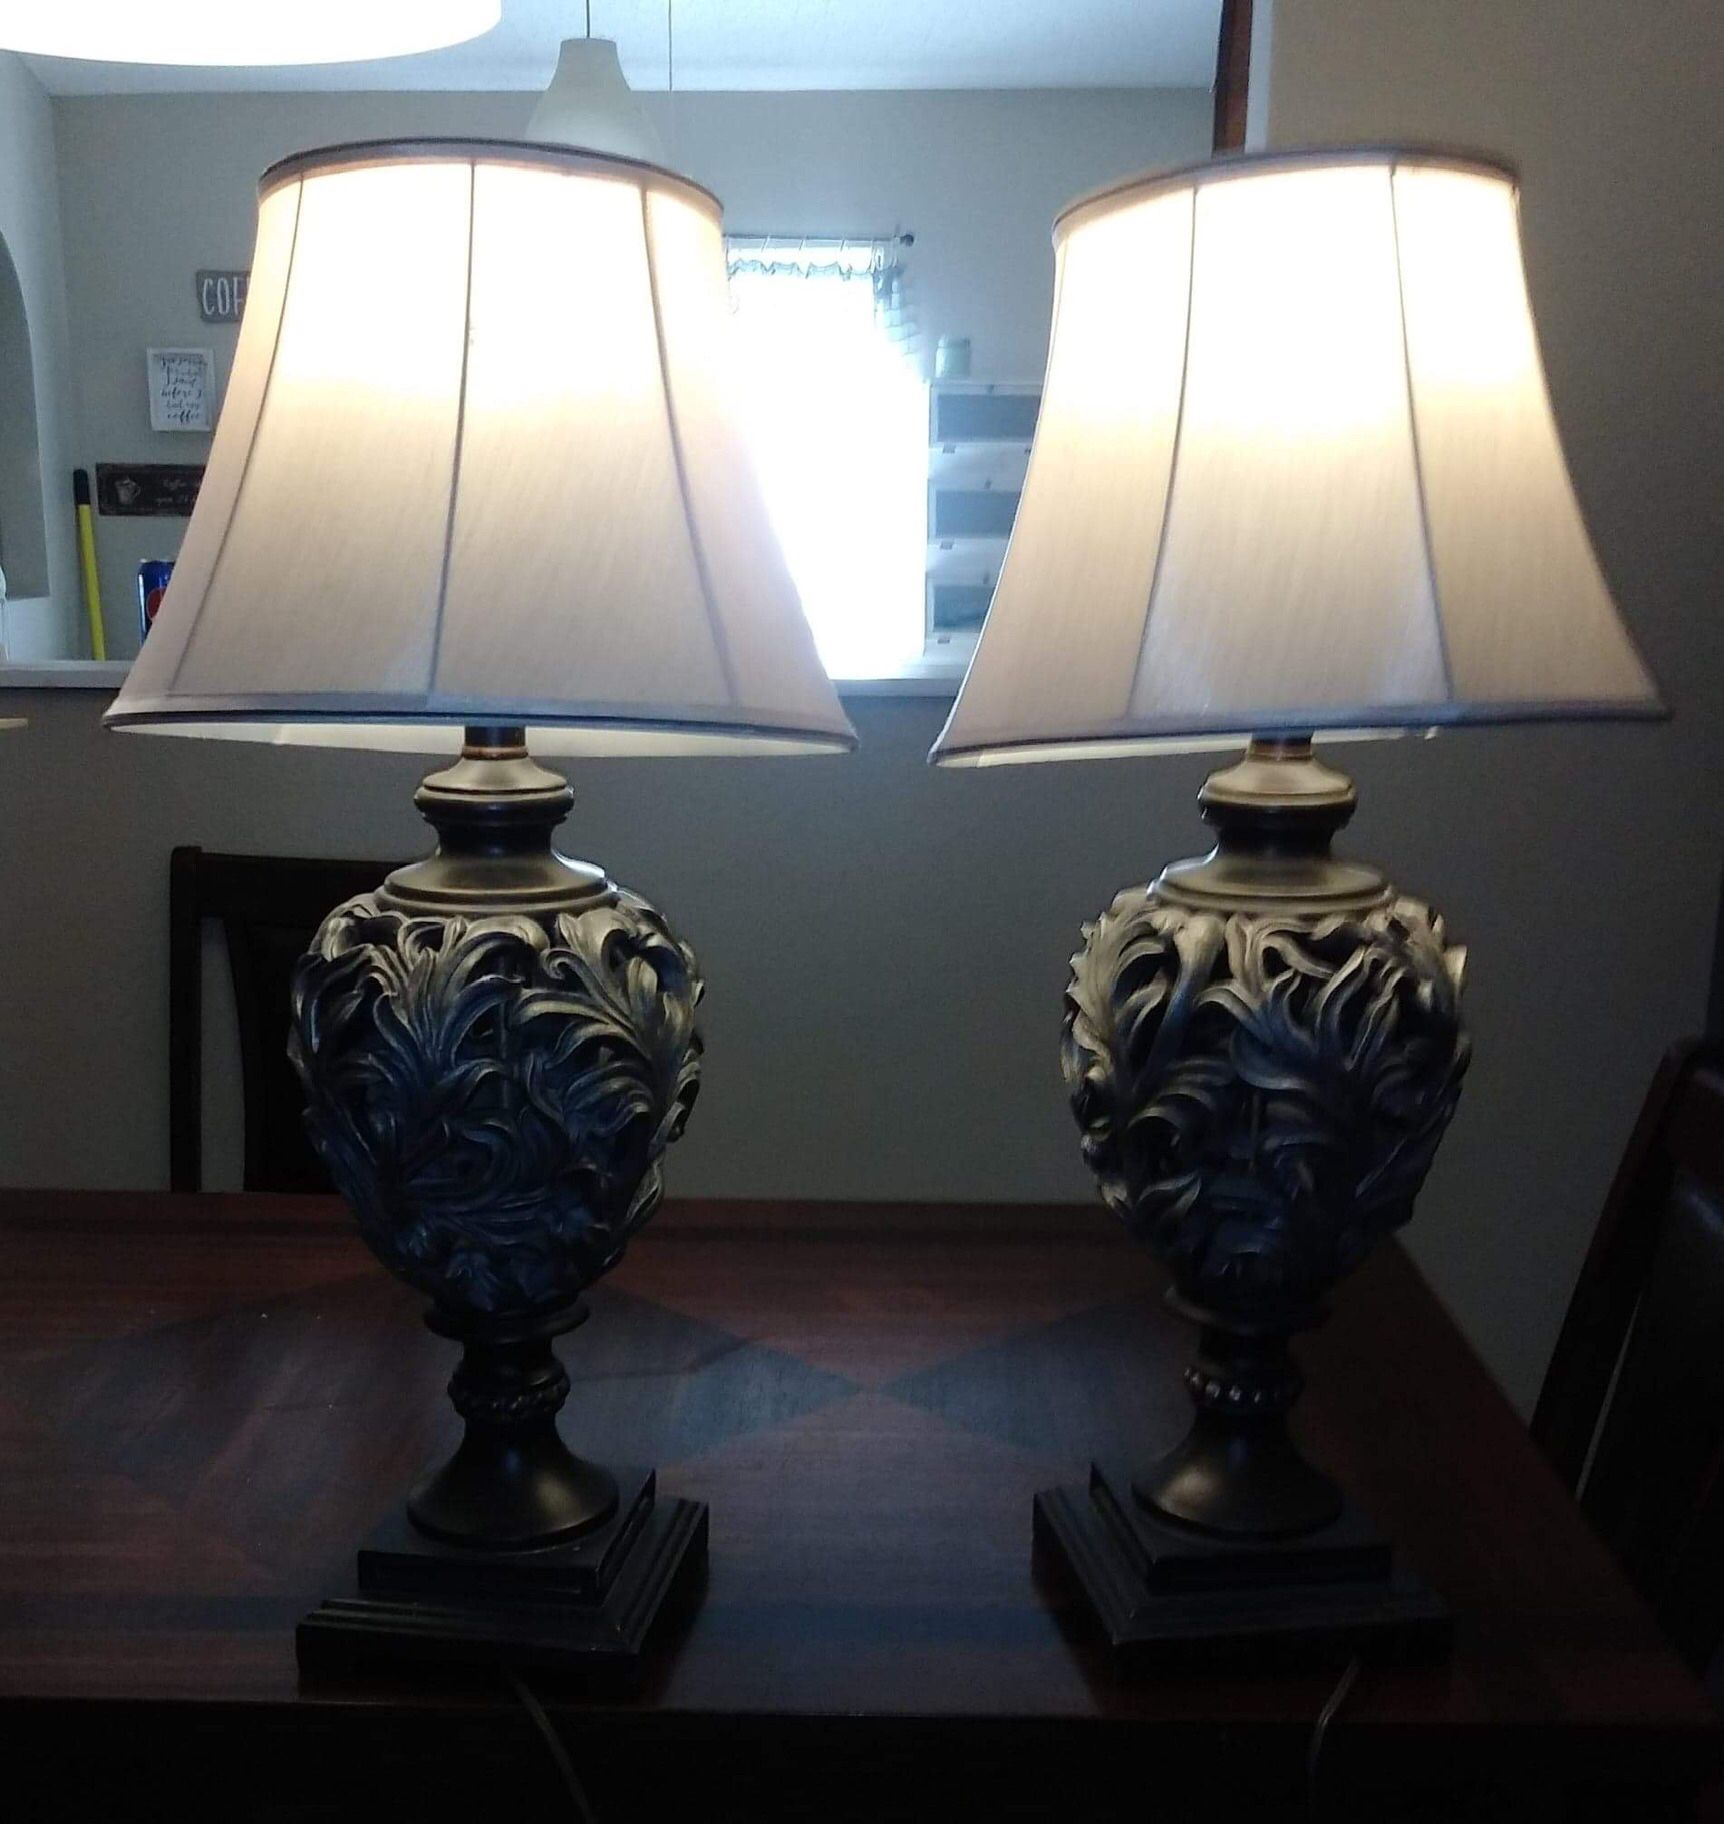 Lamps from Ashley Furniture